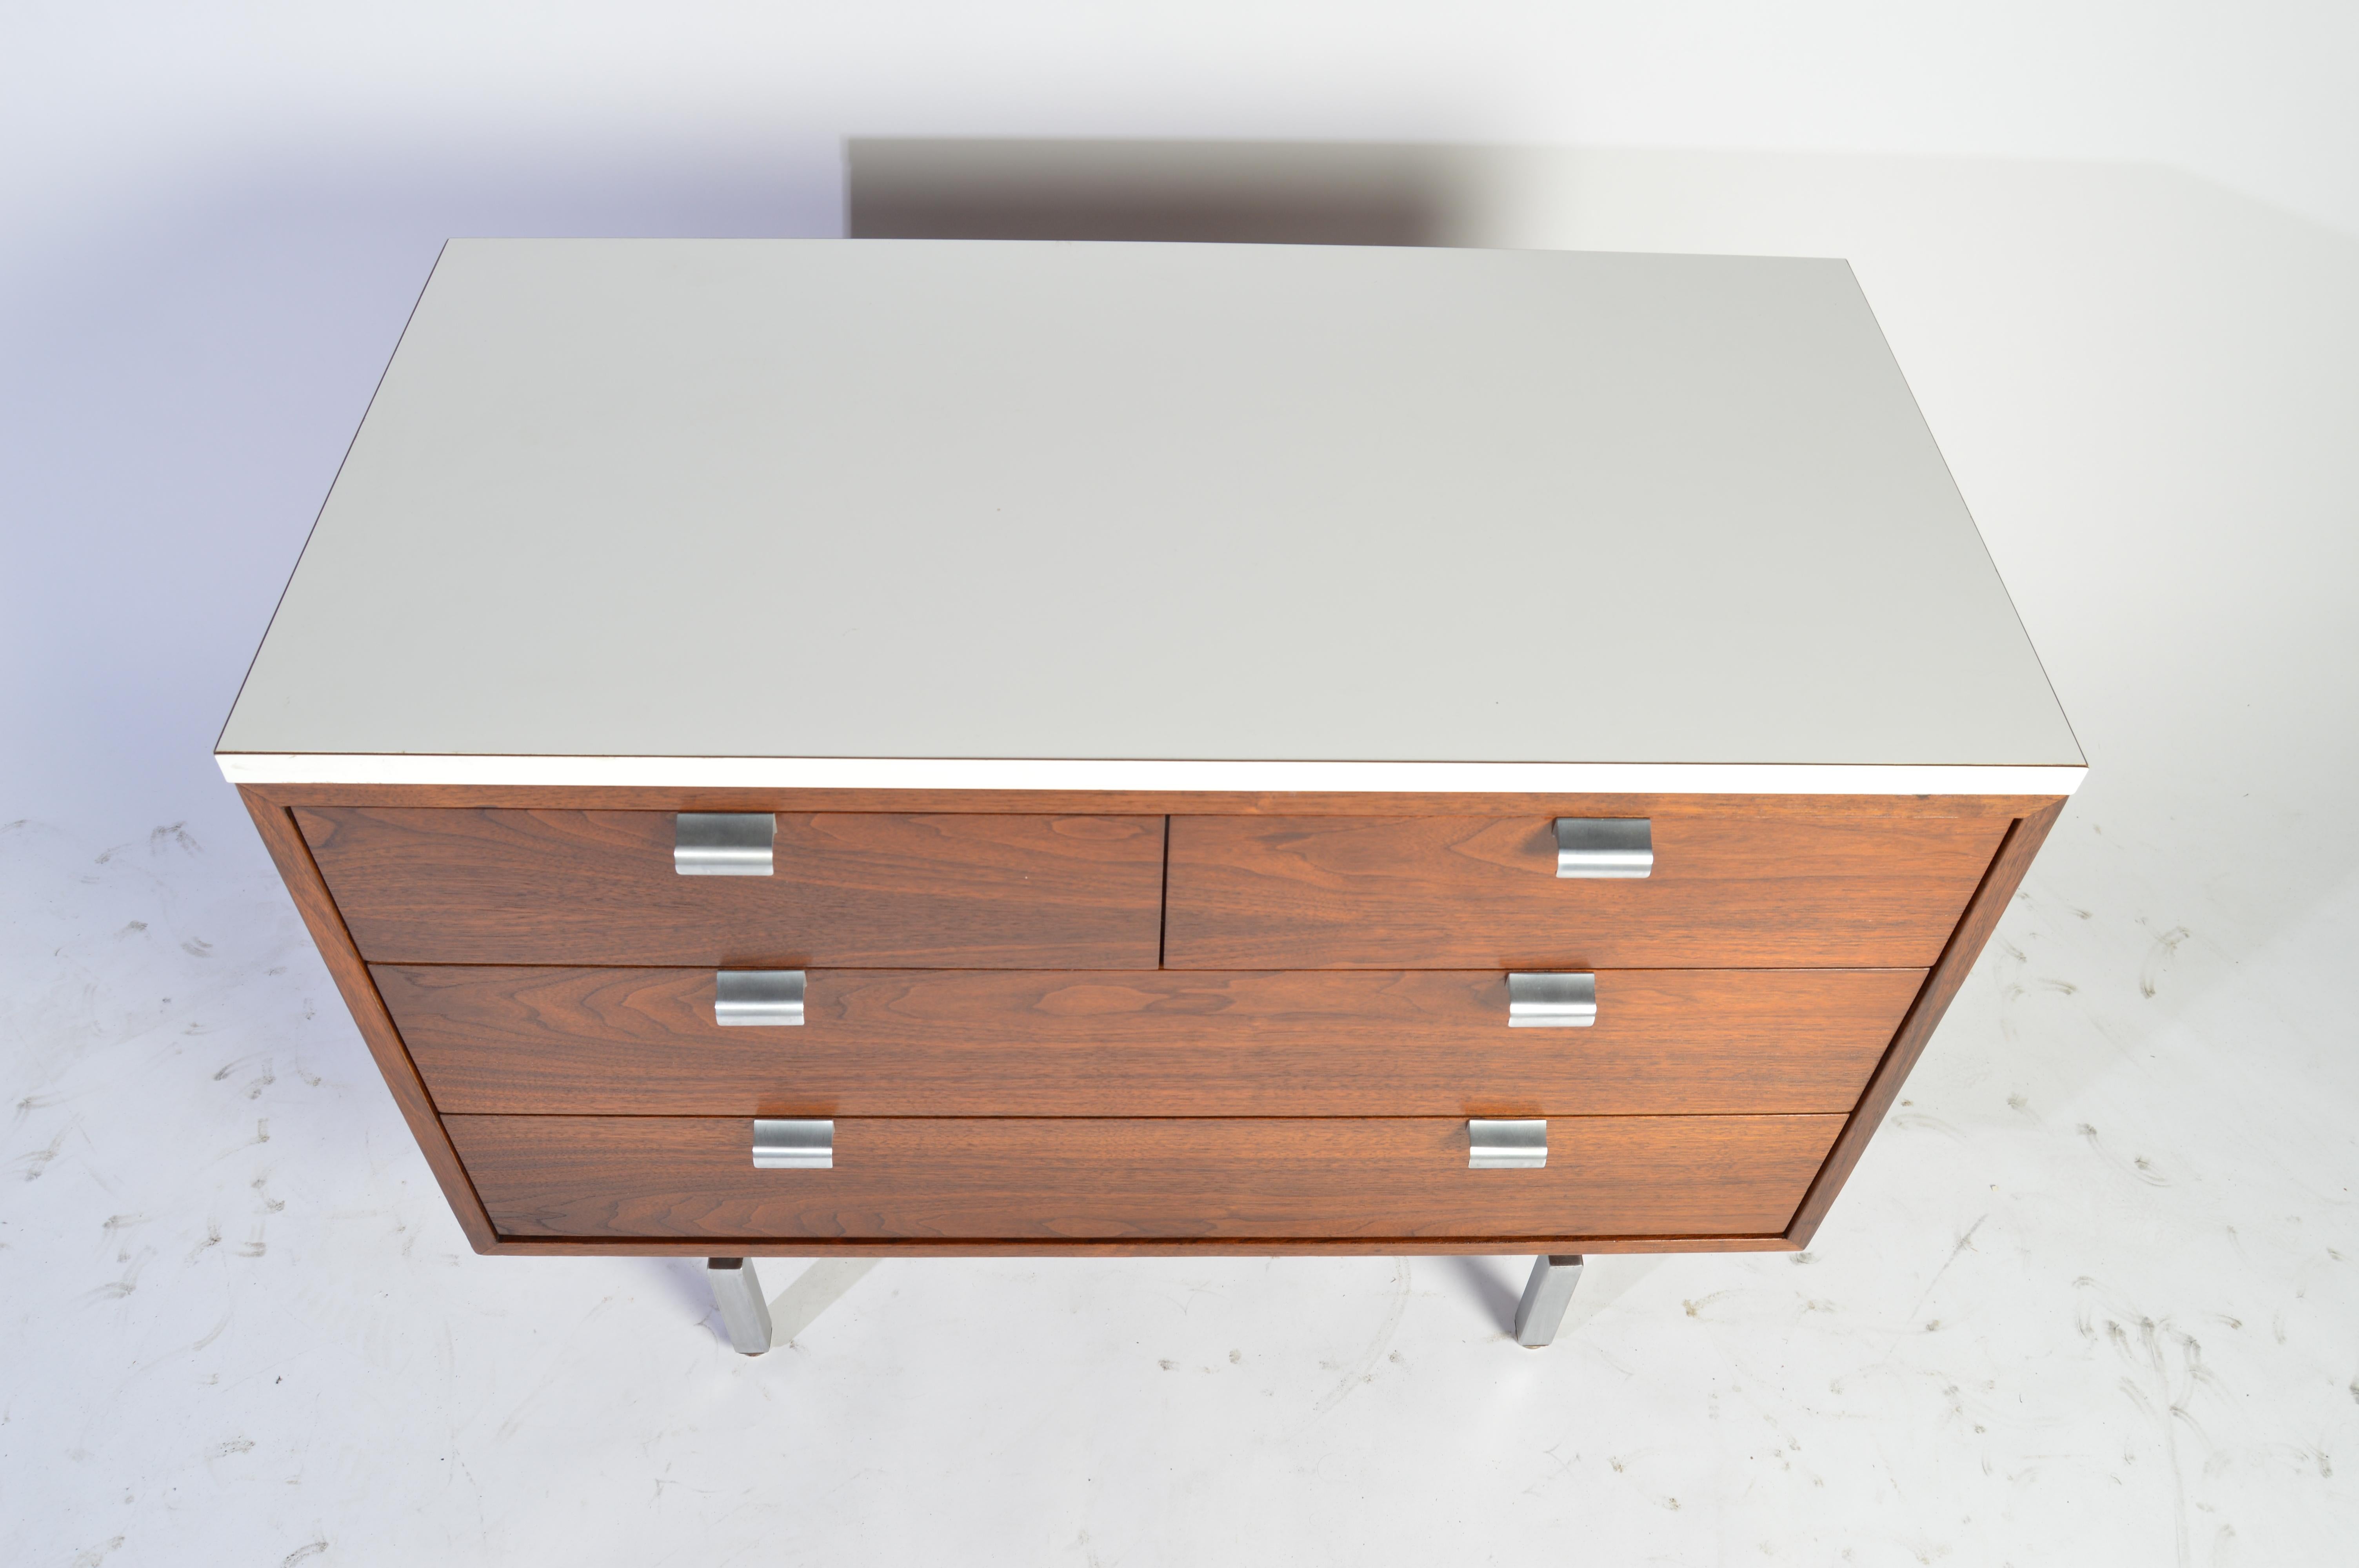 A sleek midcentury cabinet designed by George Nelson for Herman Miller in walnut having 4 drawers, aluminum pulls over an aluminum frame with white laminate top.
Beautiful condition inside and out.